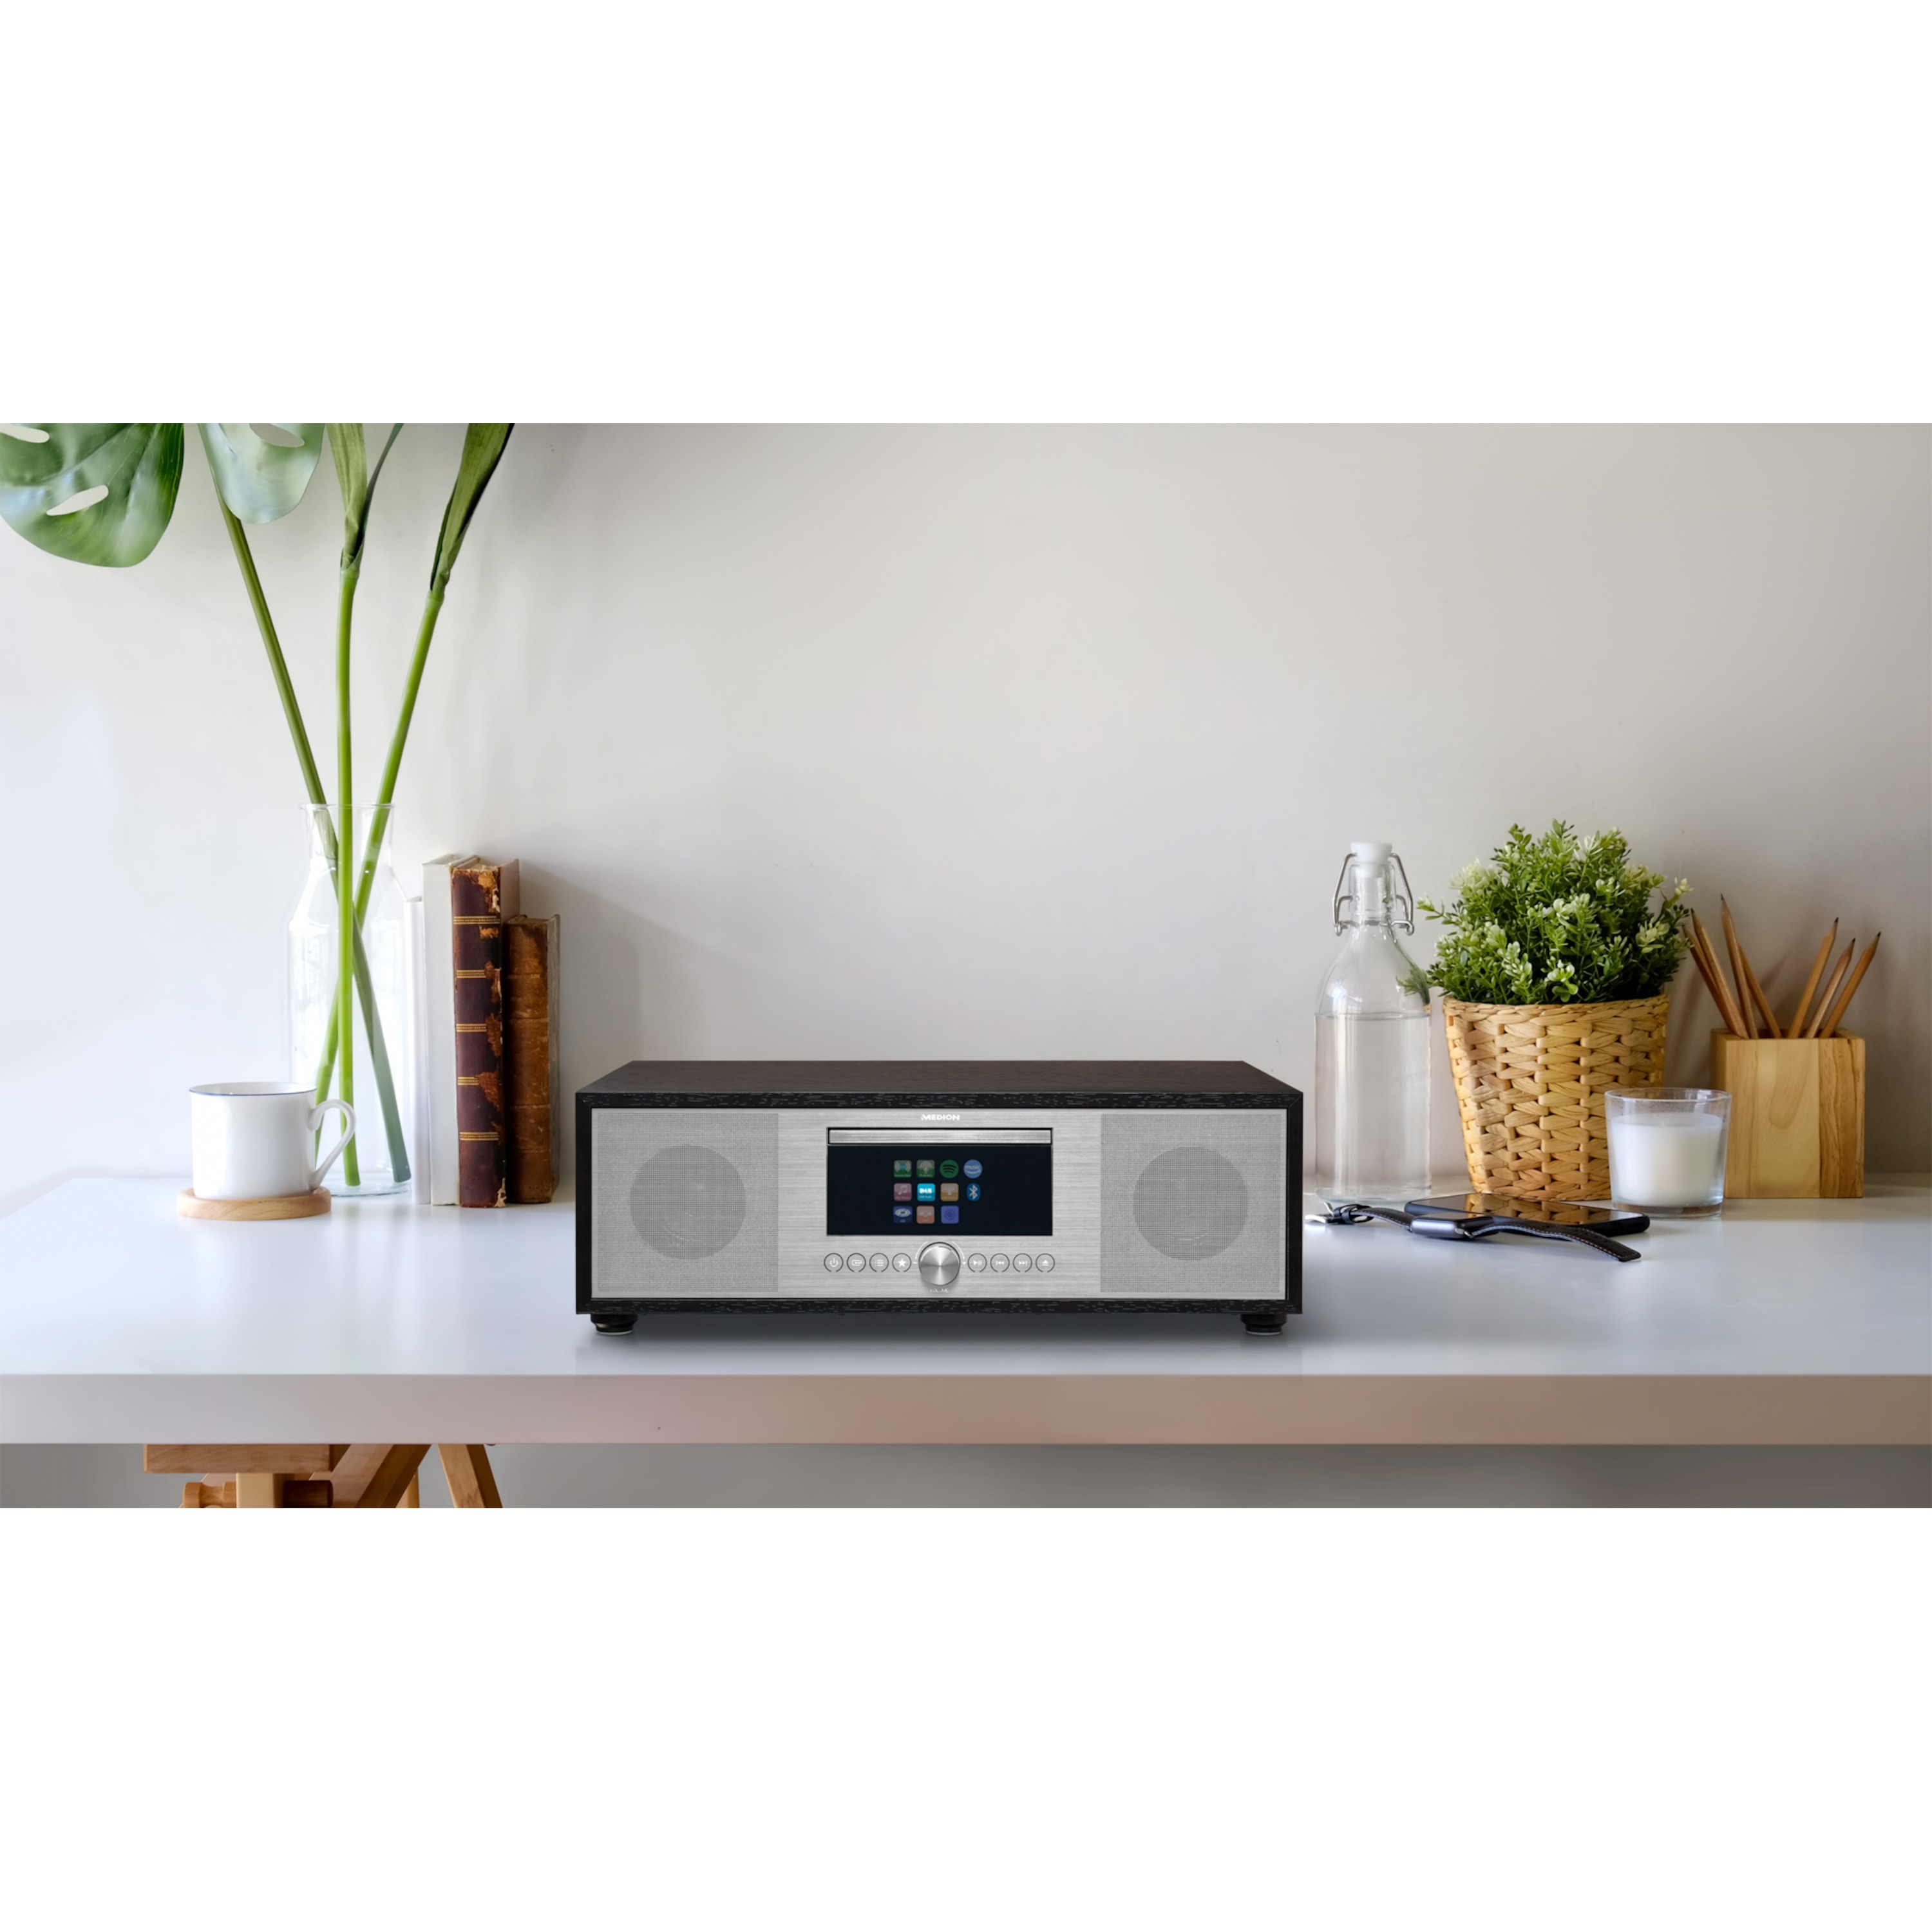 MEDION® LIFE® P66400 All-in-One Audio System, LCD-Display 7,1 (2.8''), Internet/DAB+/PLL-UKW Radio, CD/MP3-Player, Bluetooth®, WLAN, RDS, 2.1 Soundsystem, 2 x 20 W + 40 W RMS